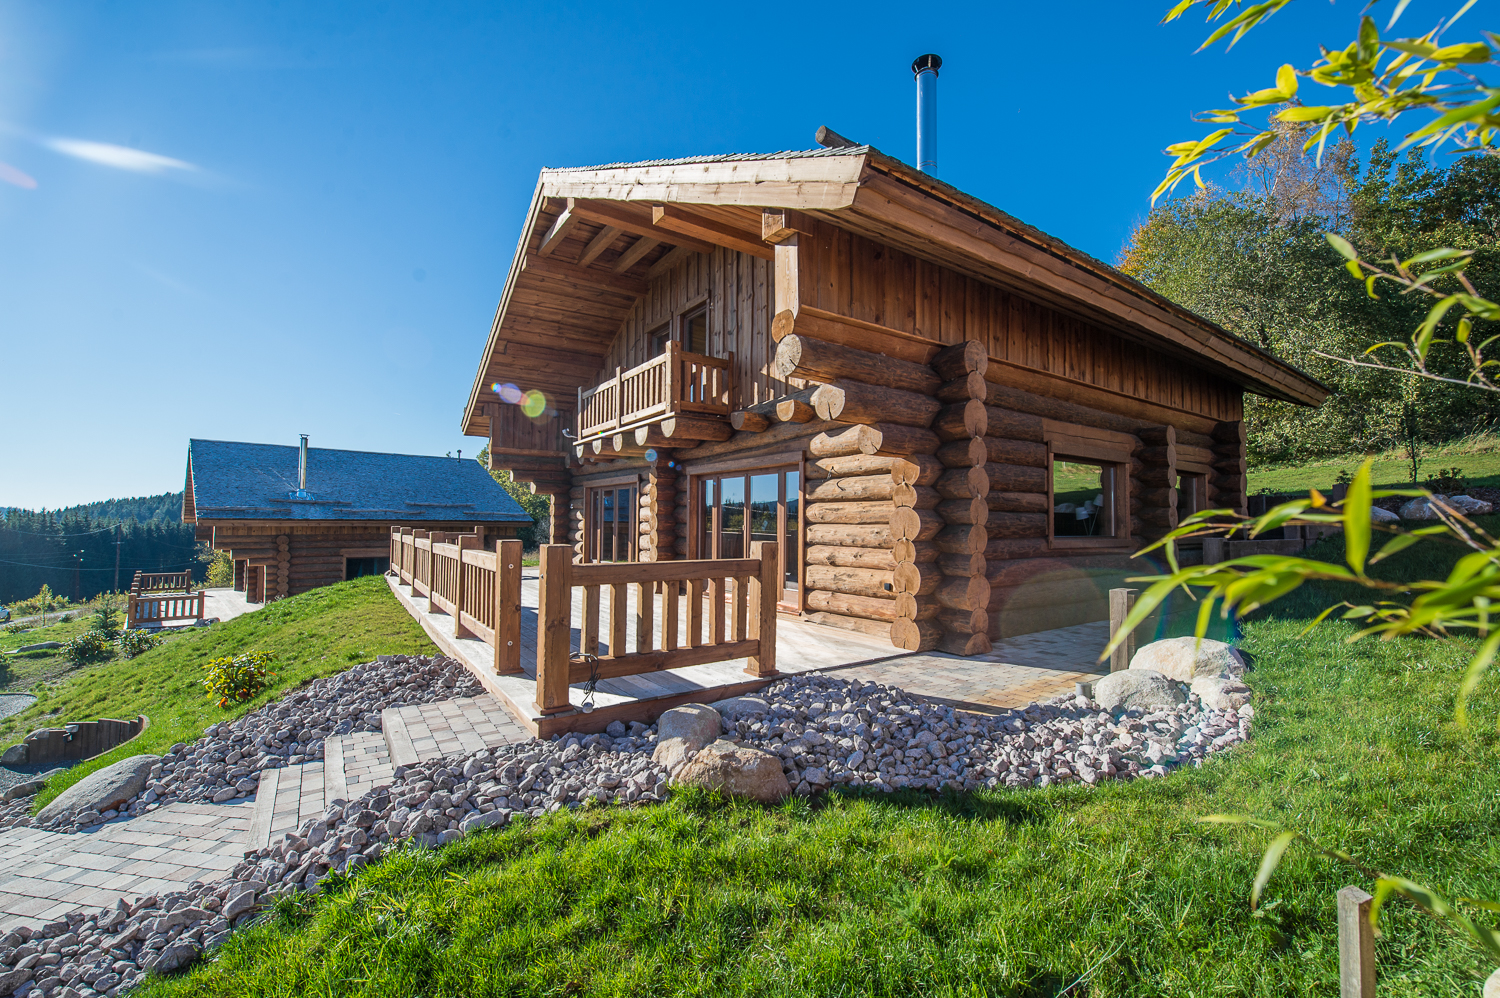 Chalet-Serenity-hiver-2015